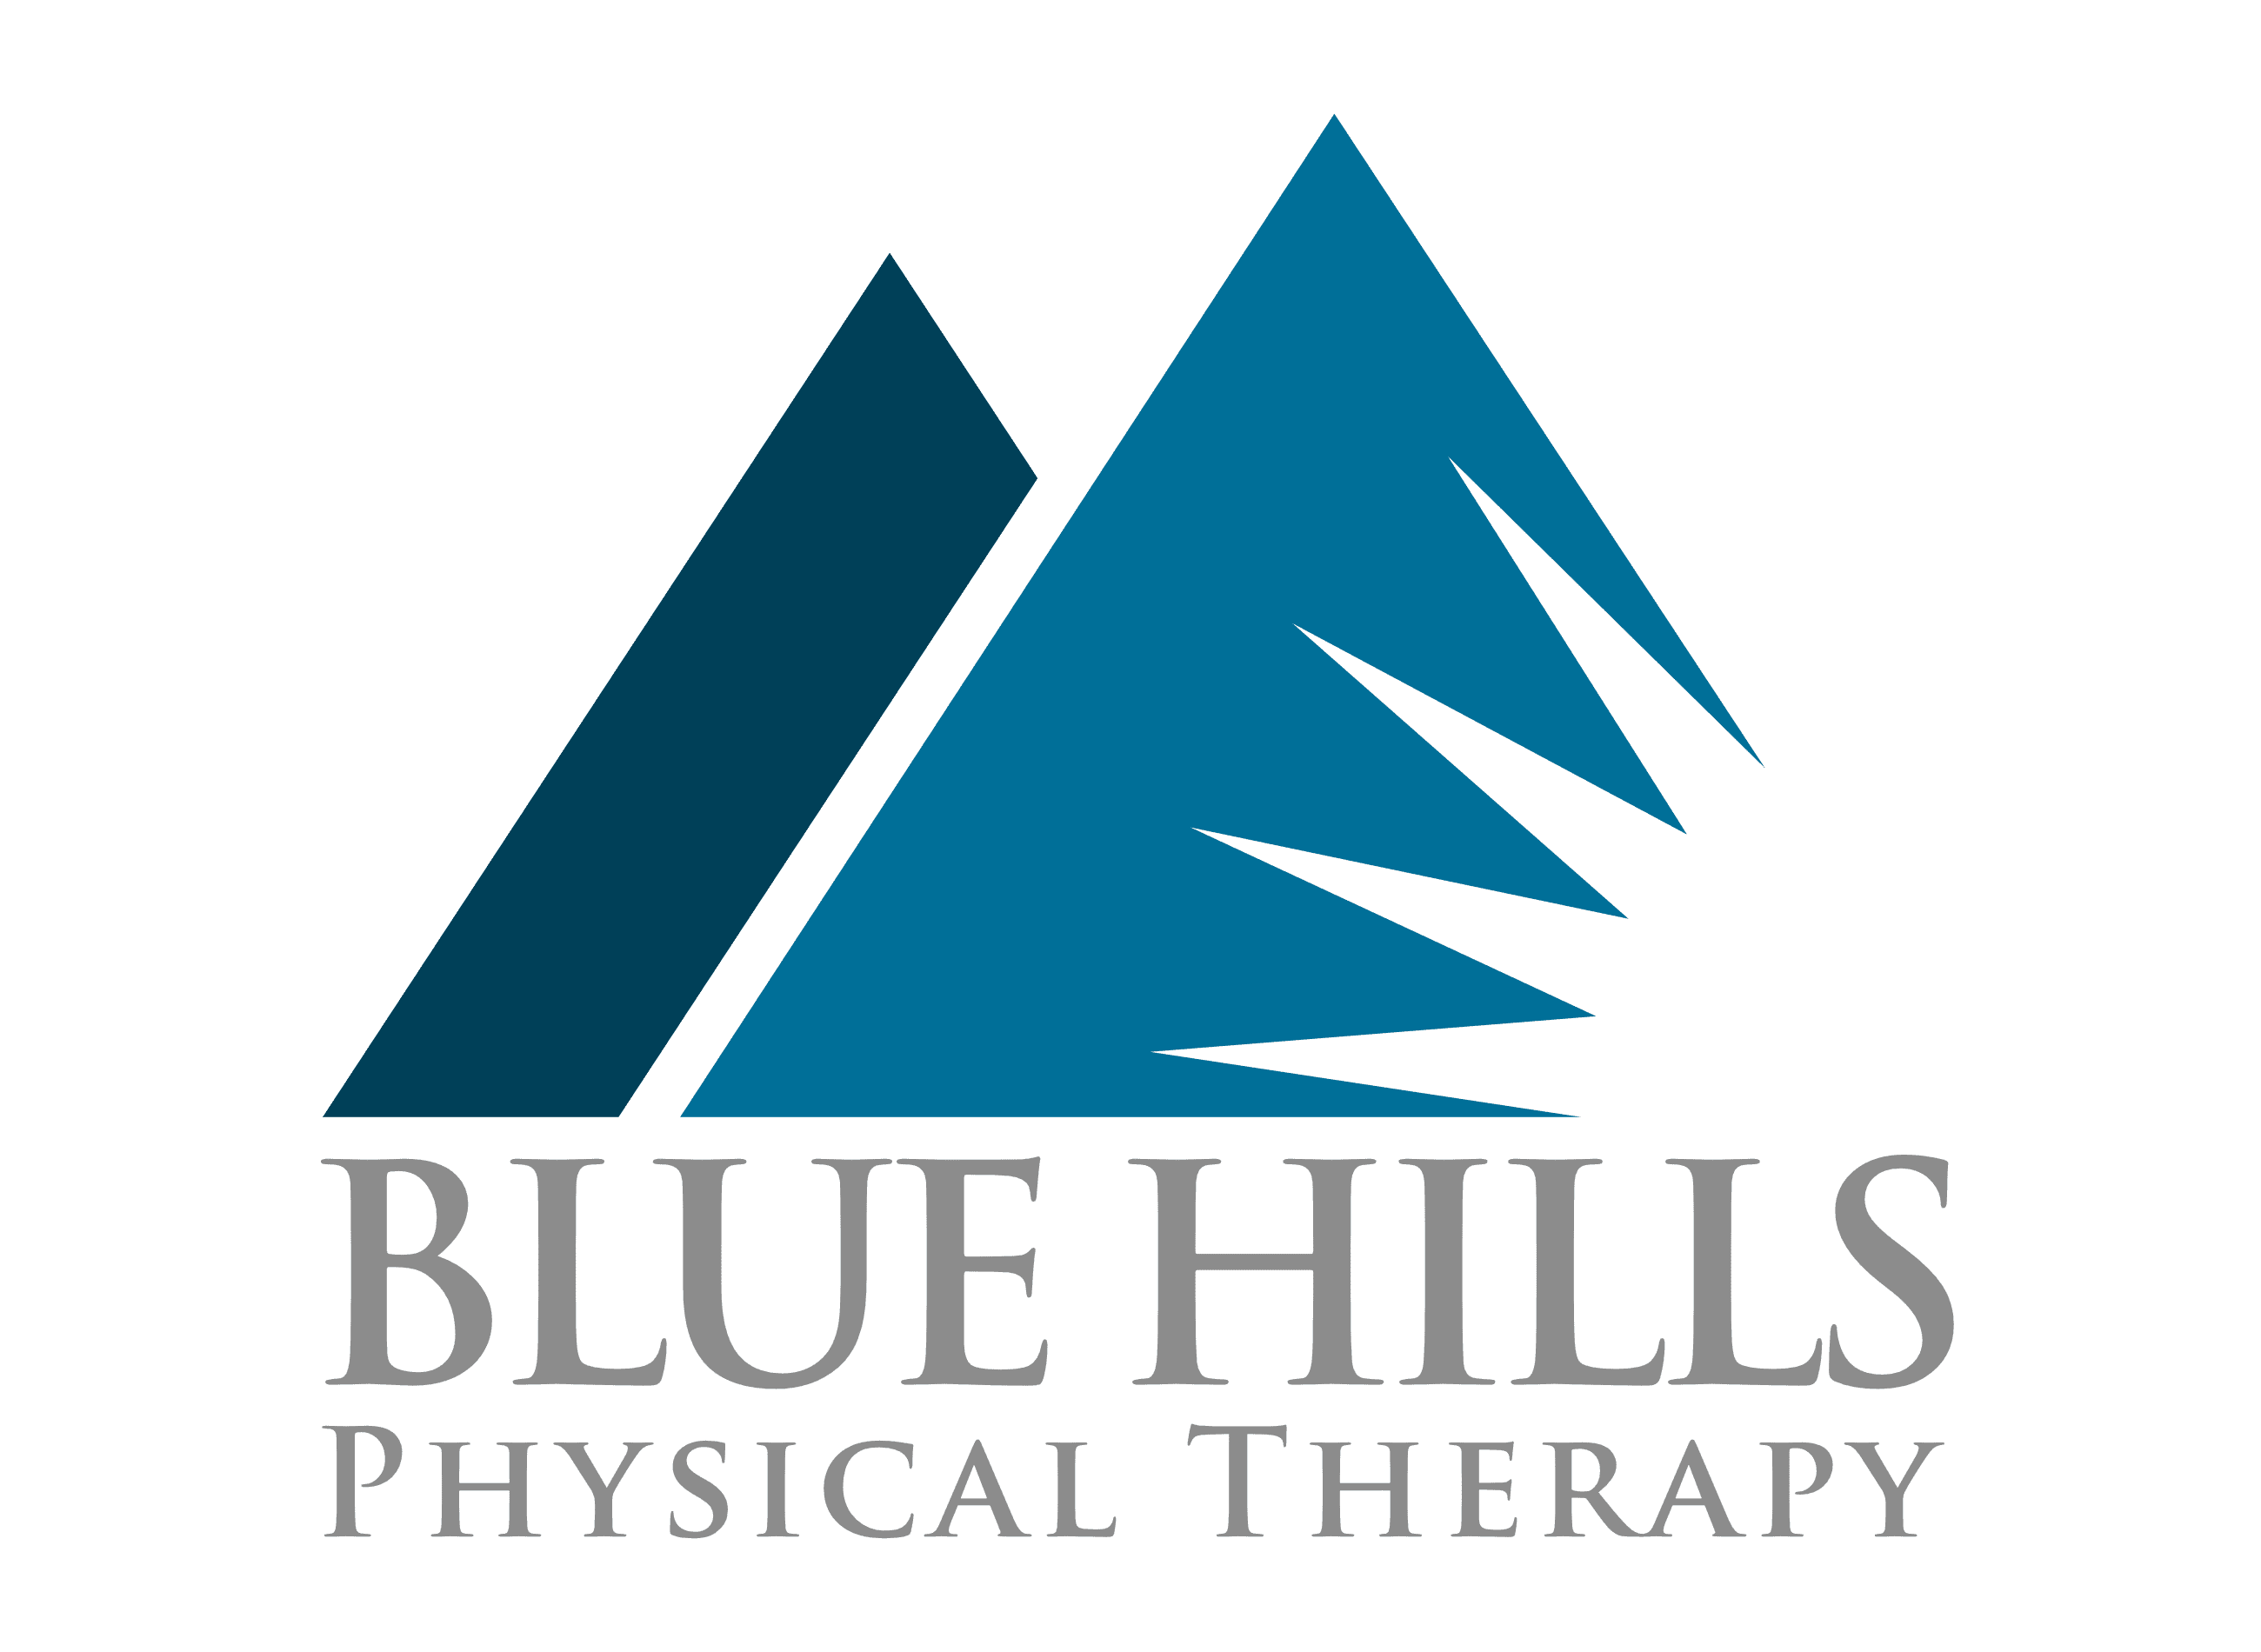 About Blue Hills Physical Therapy